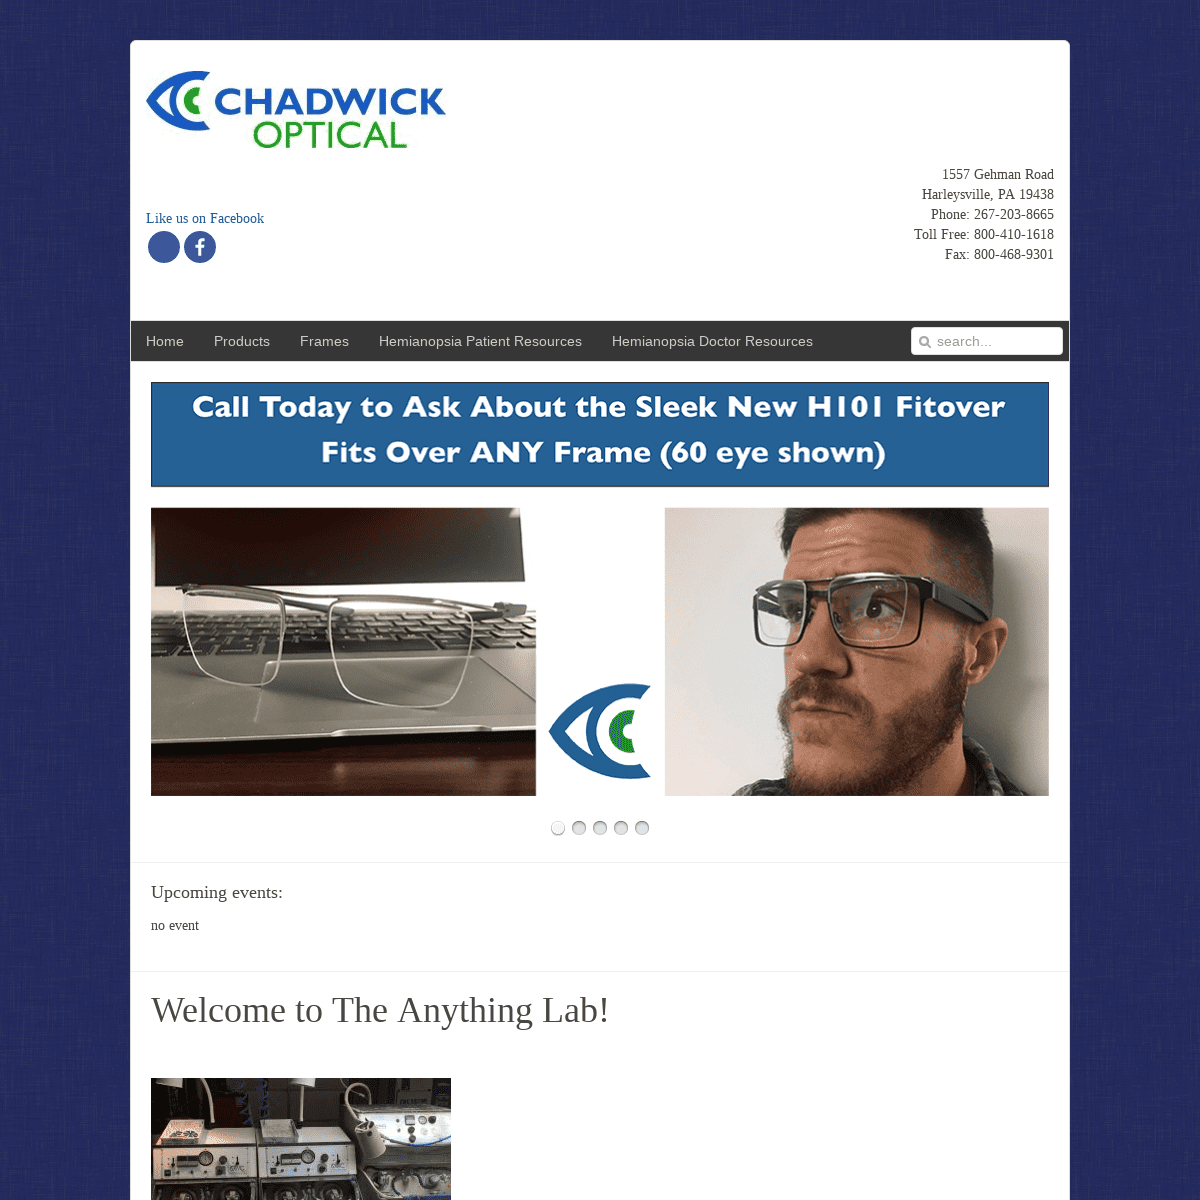 Chadwick Optical, Inc. Welcome to The Anything Lab! - Chadwick Optical, Inc.